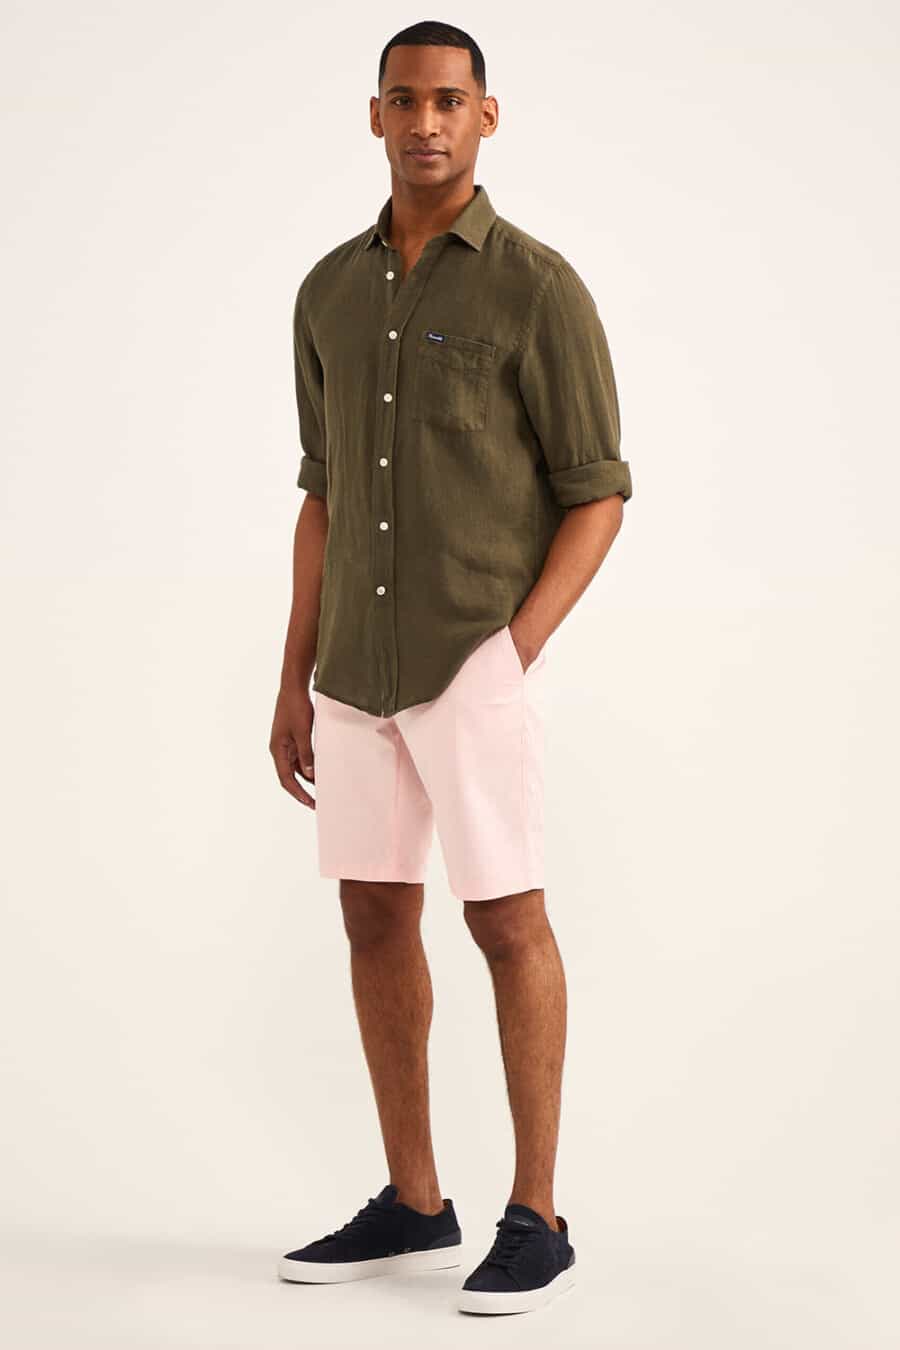 Men's pale pink shorts, olive green shirt and navy suede sneakers outfit